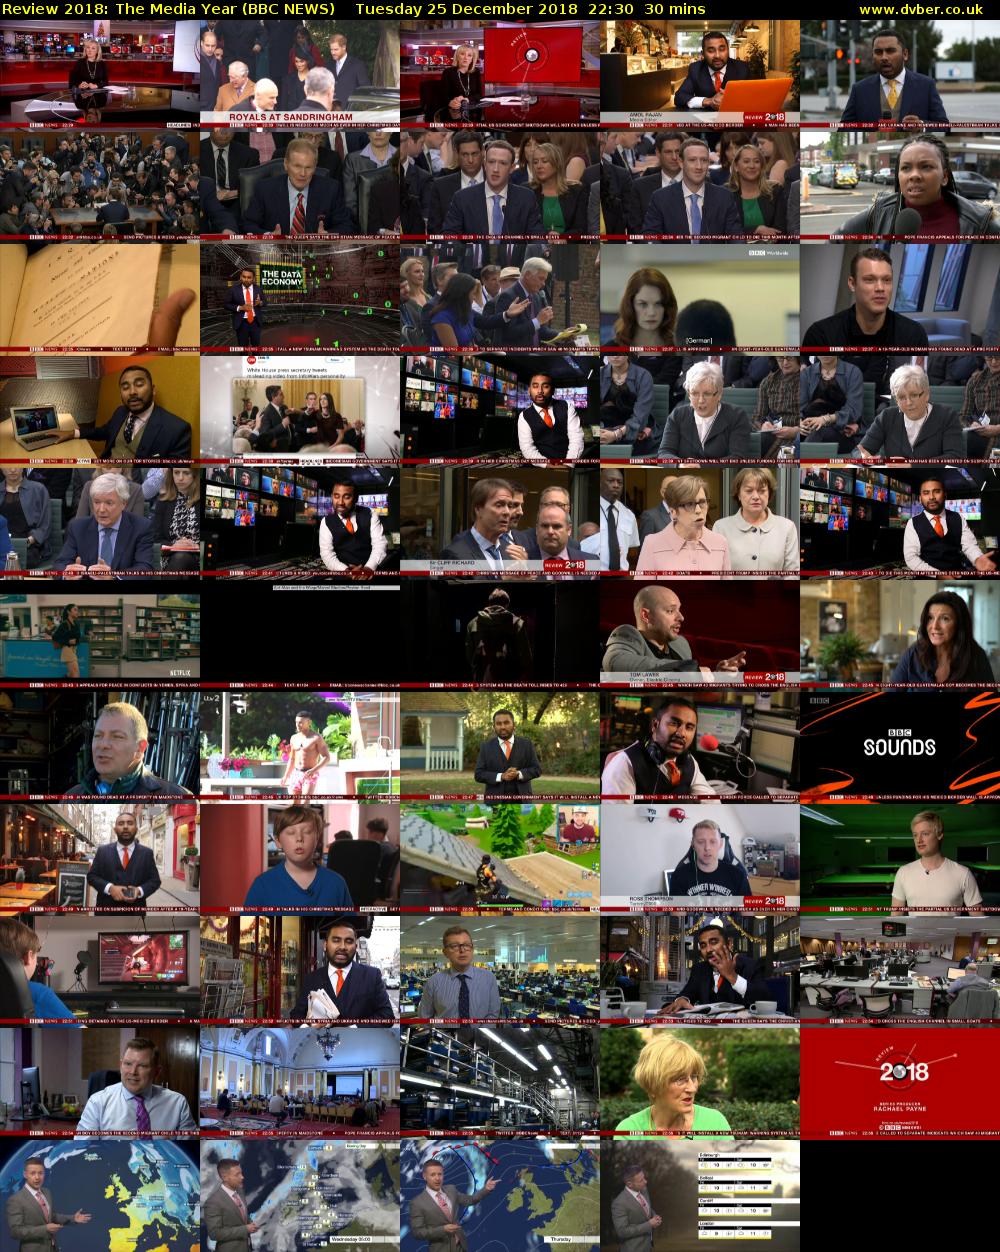 Review 2018: The Media Year (BBC NEWS) Tuesday 25 December 2018 22:30 - 23:00